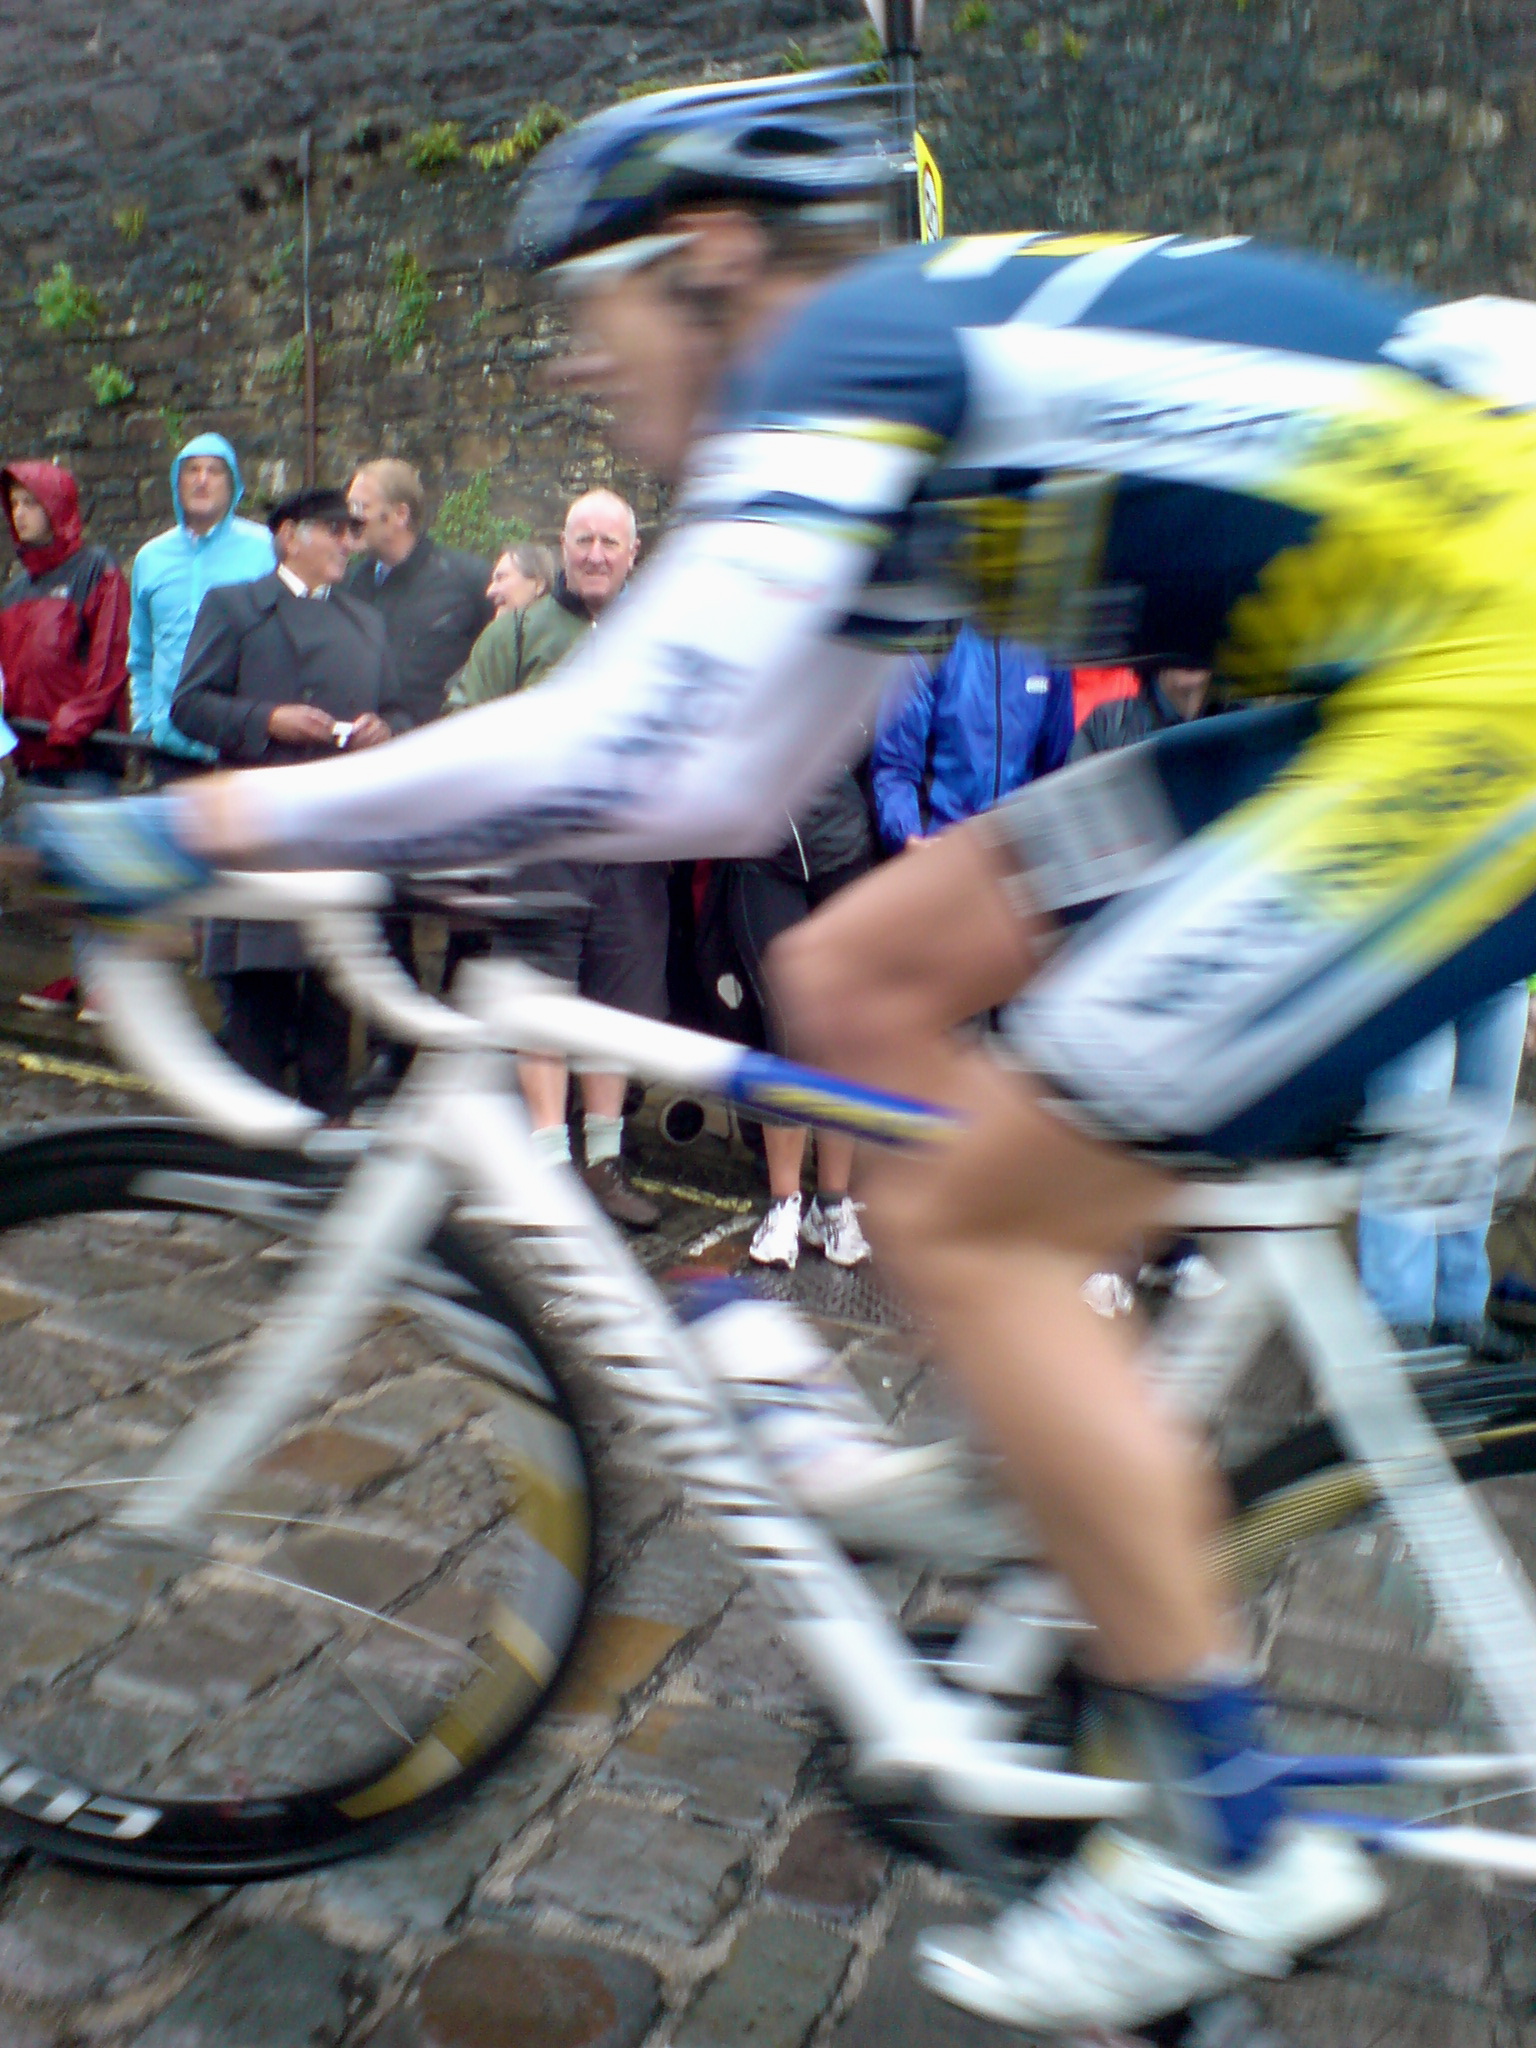 the bicyclist is racing in front of a large crowd